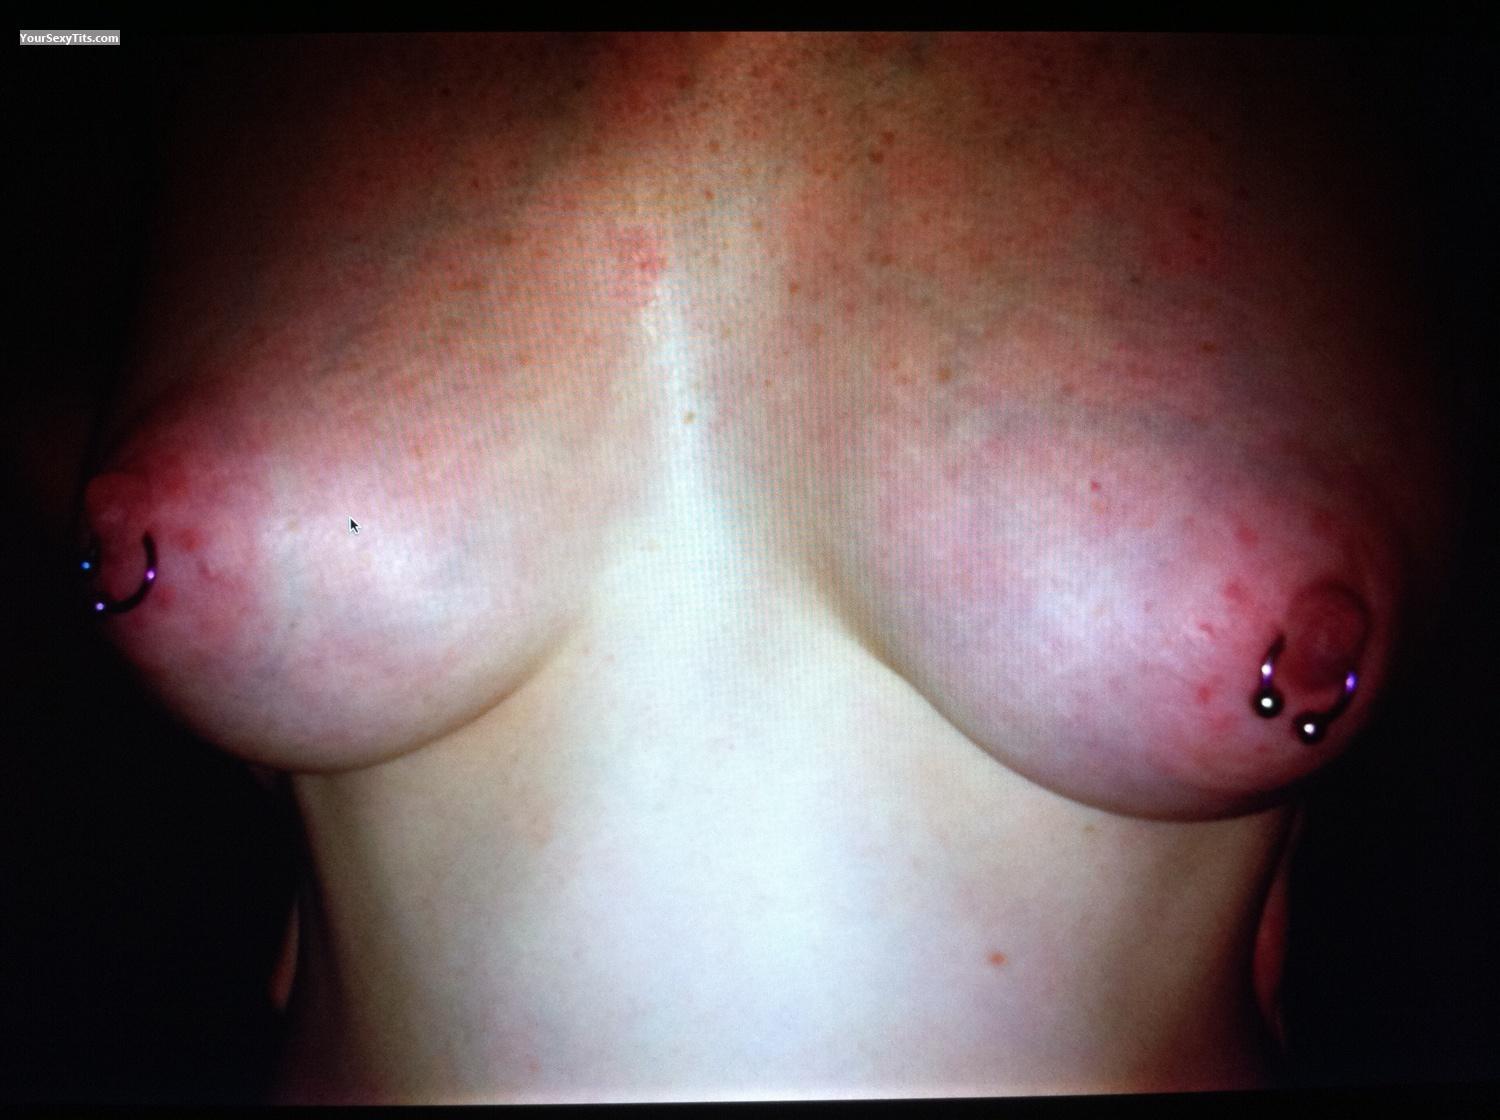 Tit Flash: Medium Tits By IPhone - Lucy7 from United StatesPierced Nipples 